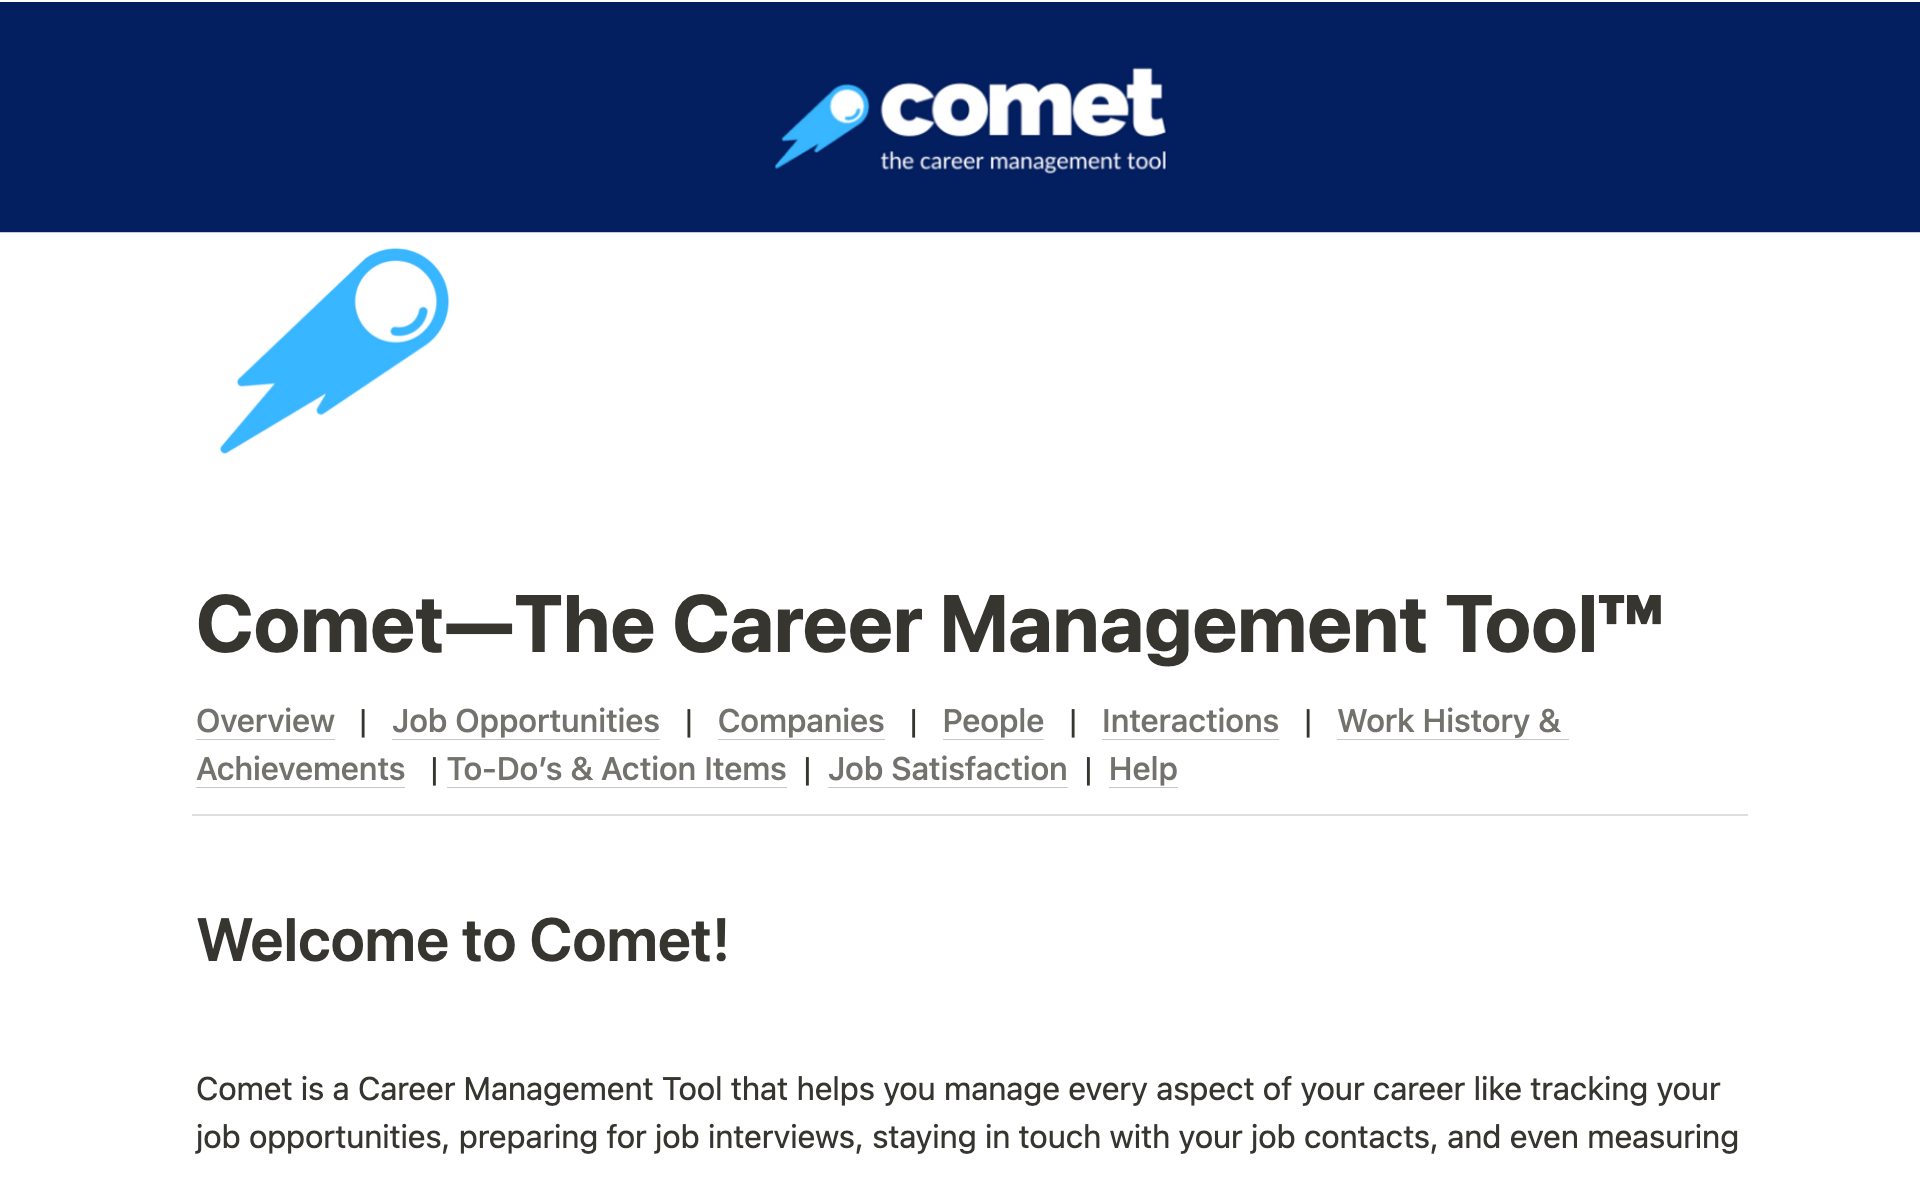 Comet helps people manage their entire career, from conducting a job search to building a resume, all in one place, right in Notion.